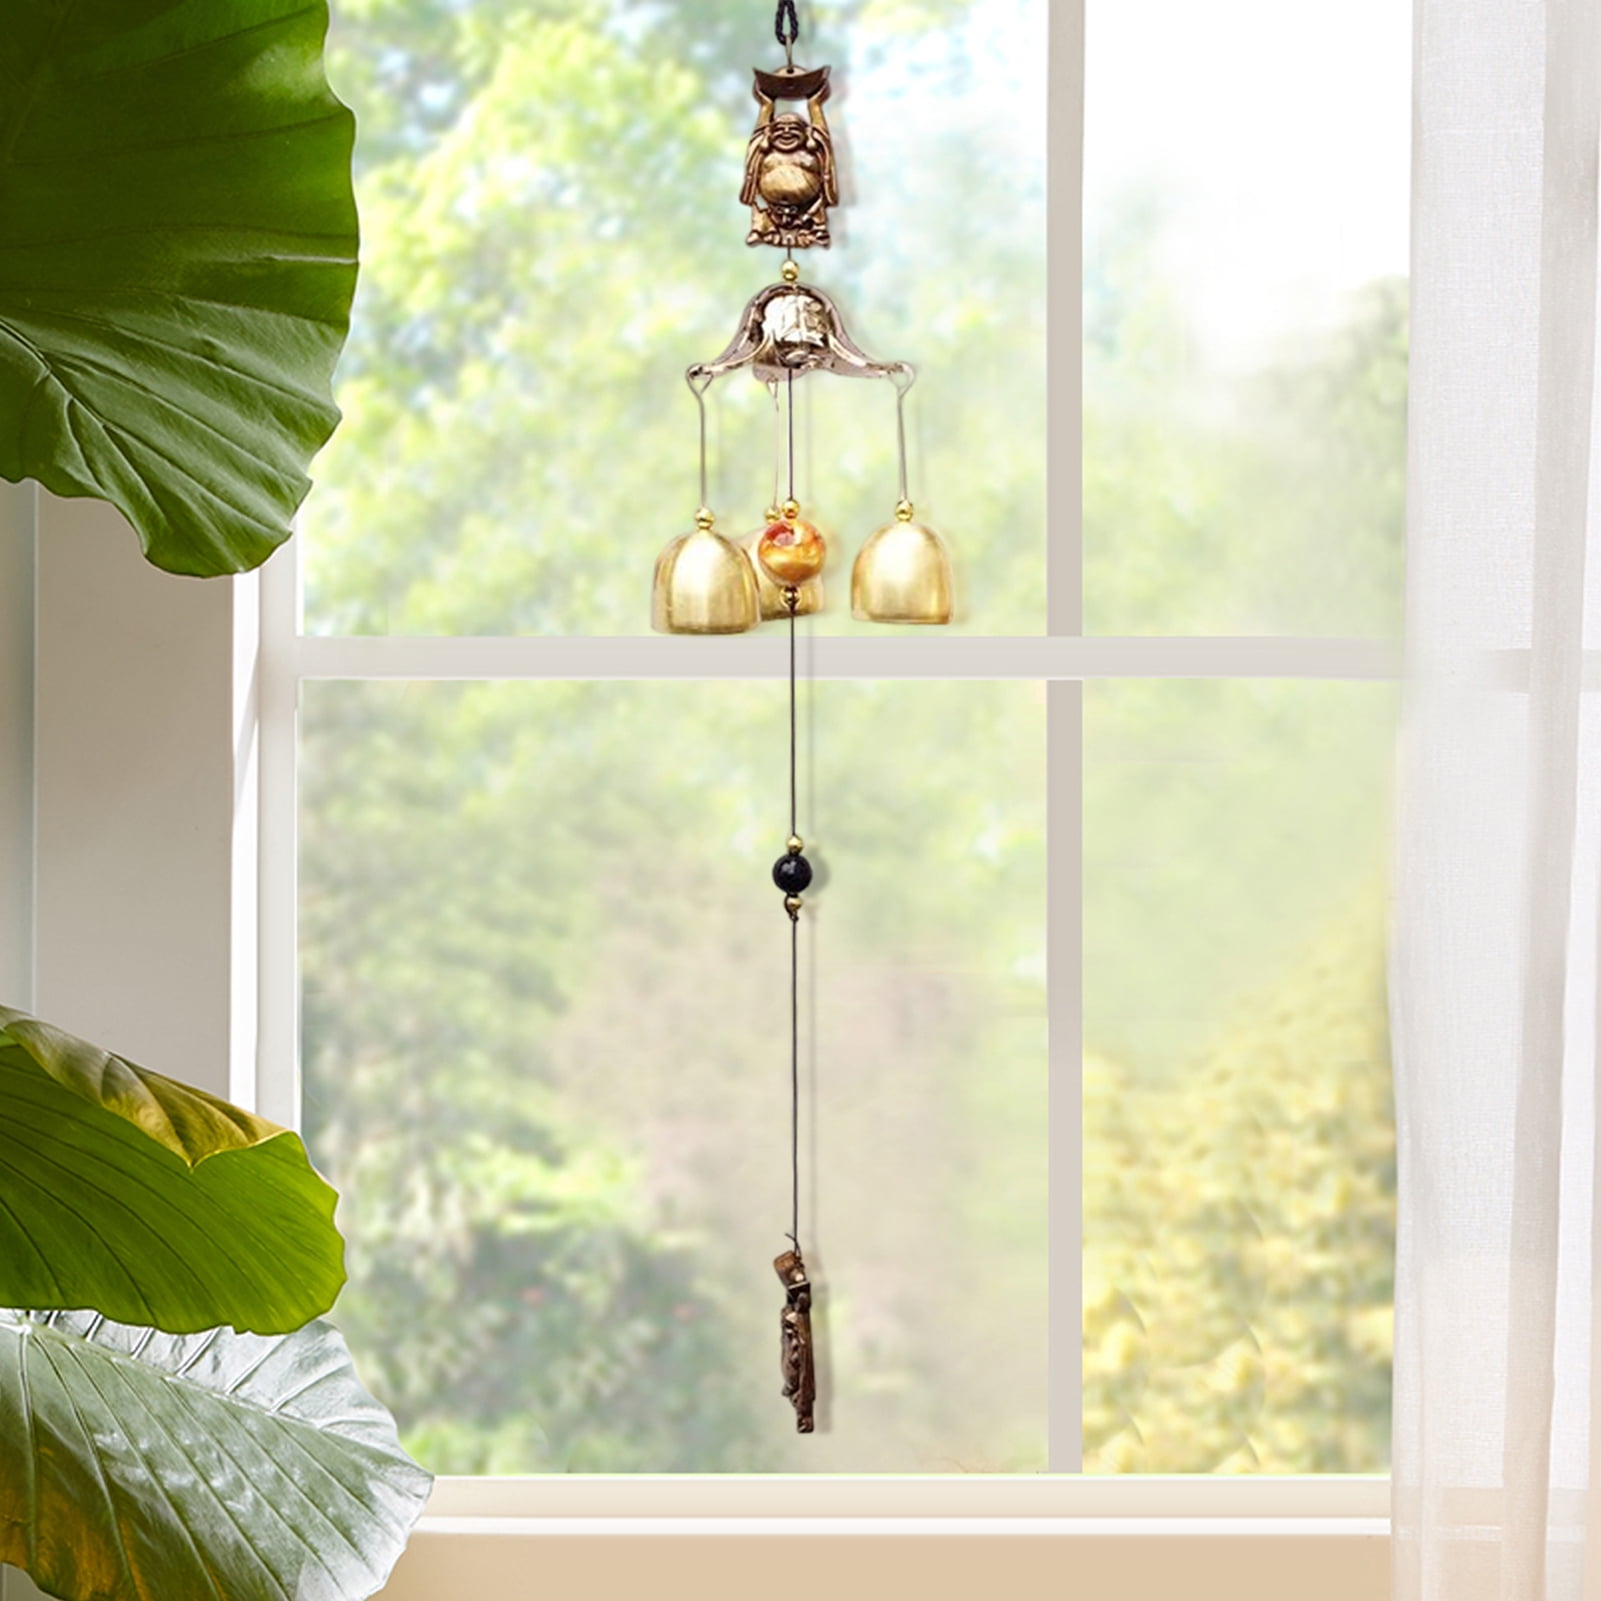 Yirtree Wind Chimes, Vintage Metal Wind Chime Bells Chinese